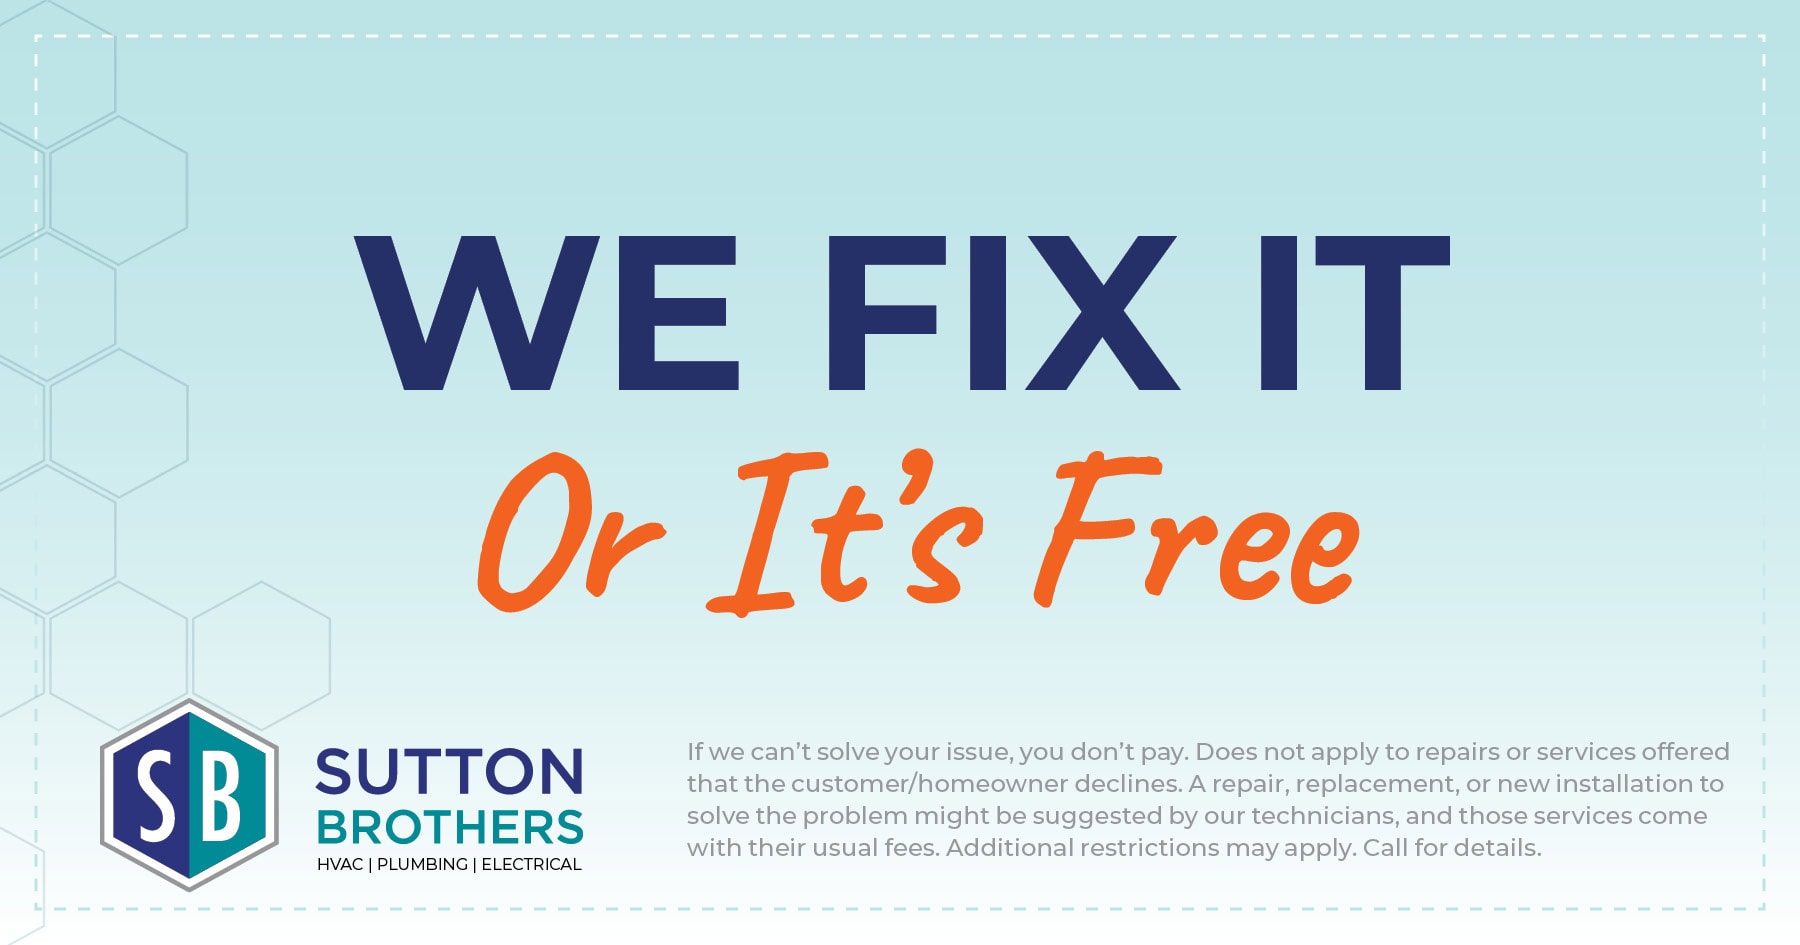 We fix it or it's free! If we can't solve your issue, you don't pay. Does not apply to repairs or services offered that the customer/homeowner declines. A repair, replacement, or new installation to solve the problem might be suggested by our technicians, and those services come with their usual fees. Additional restrictions my apply. Call for details.